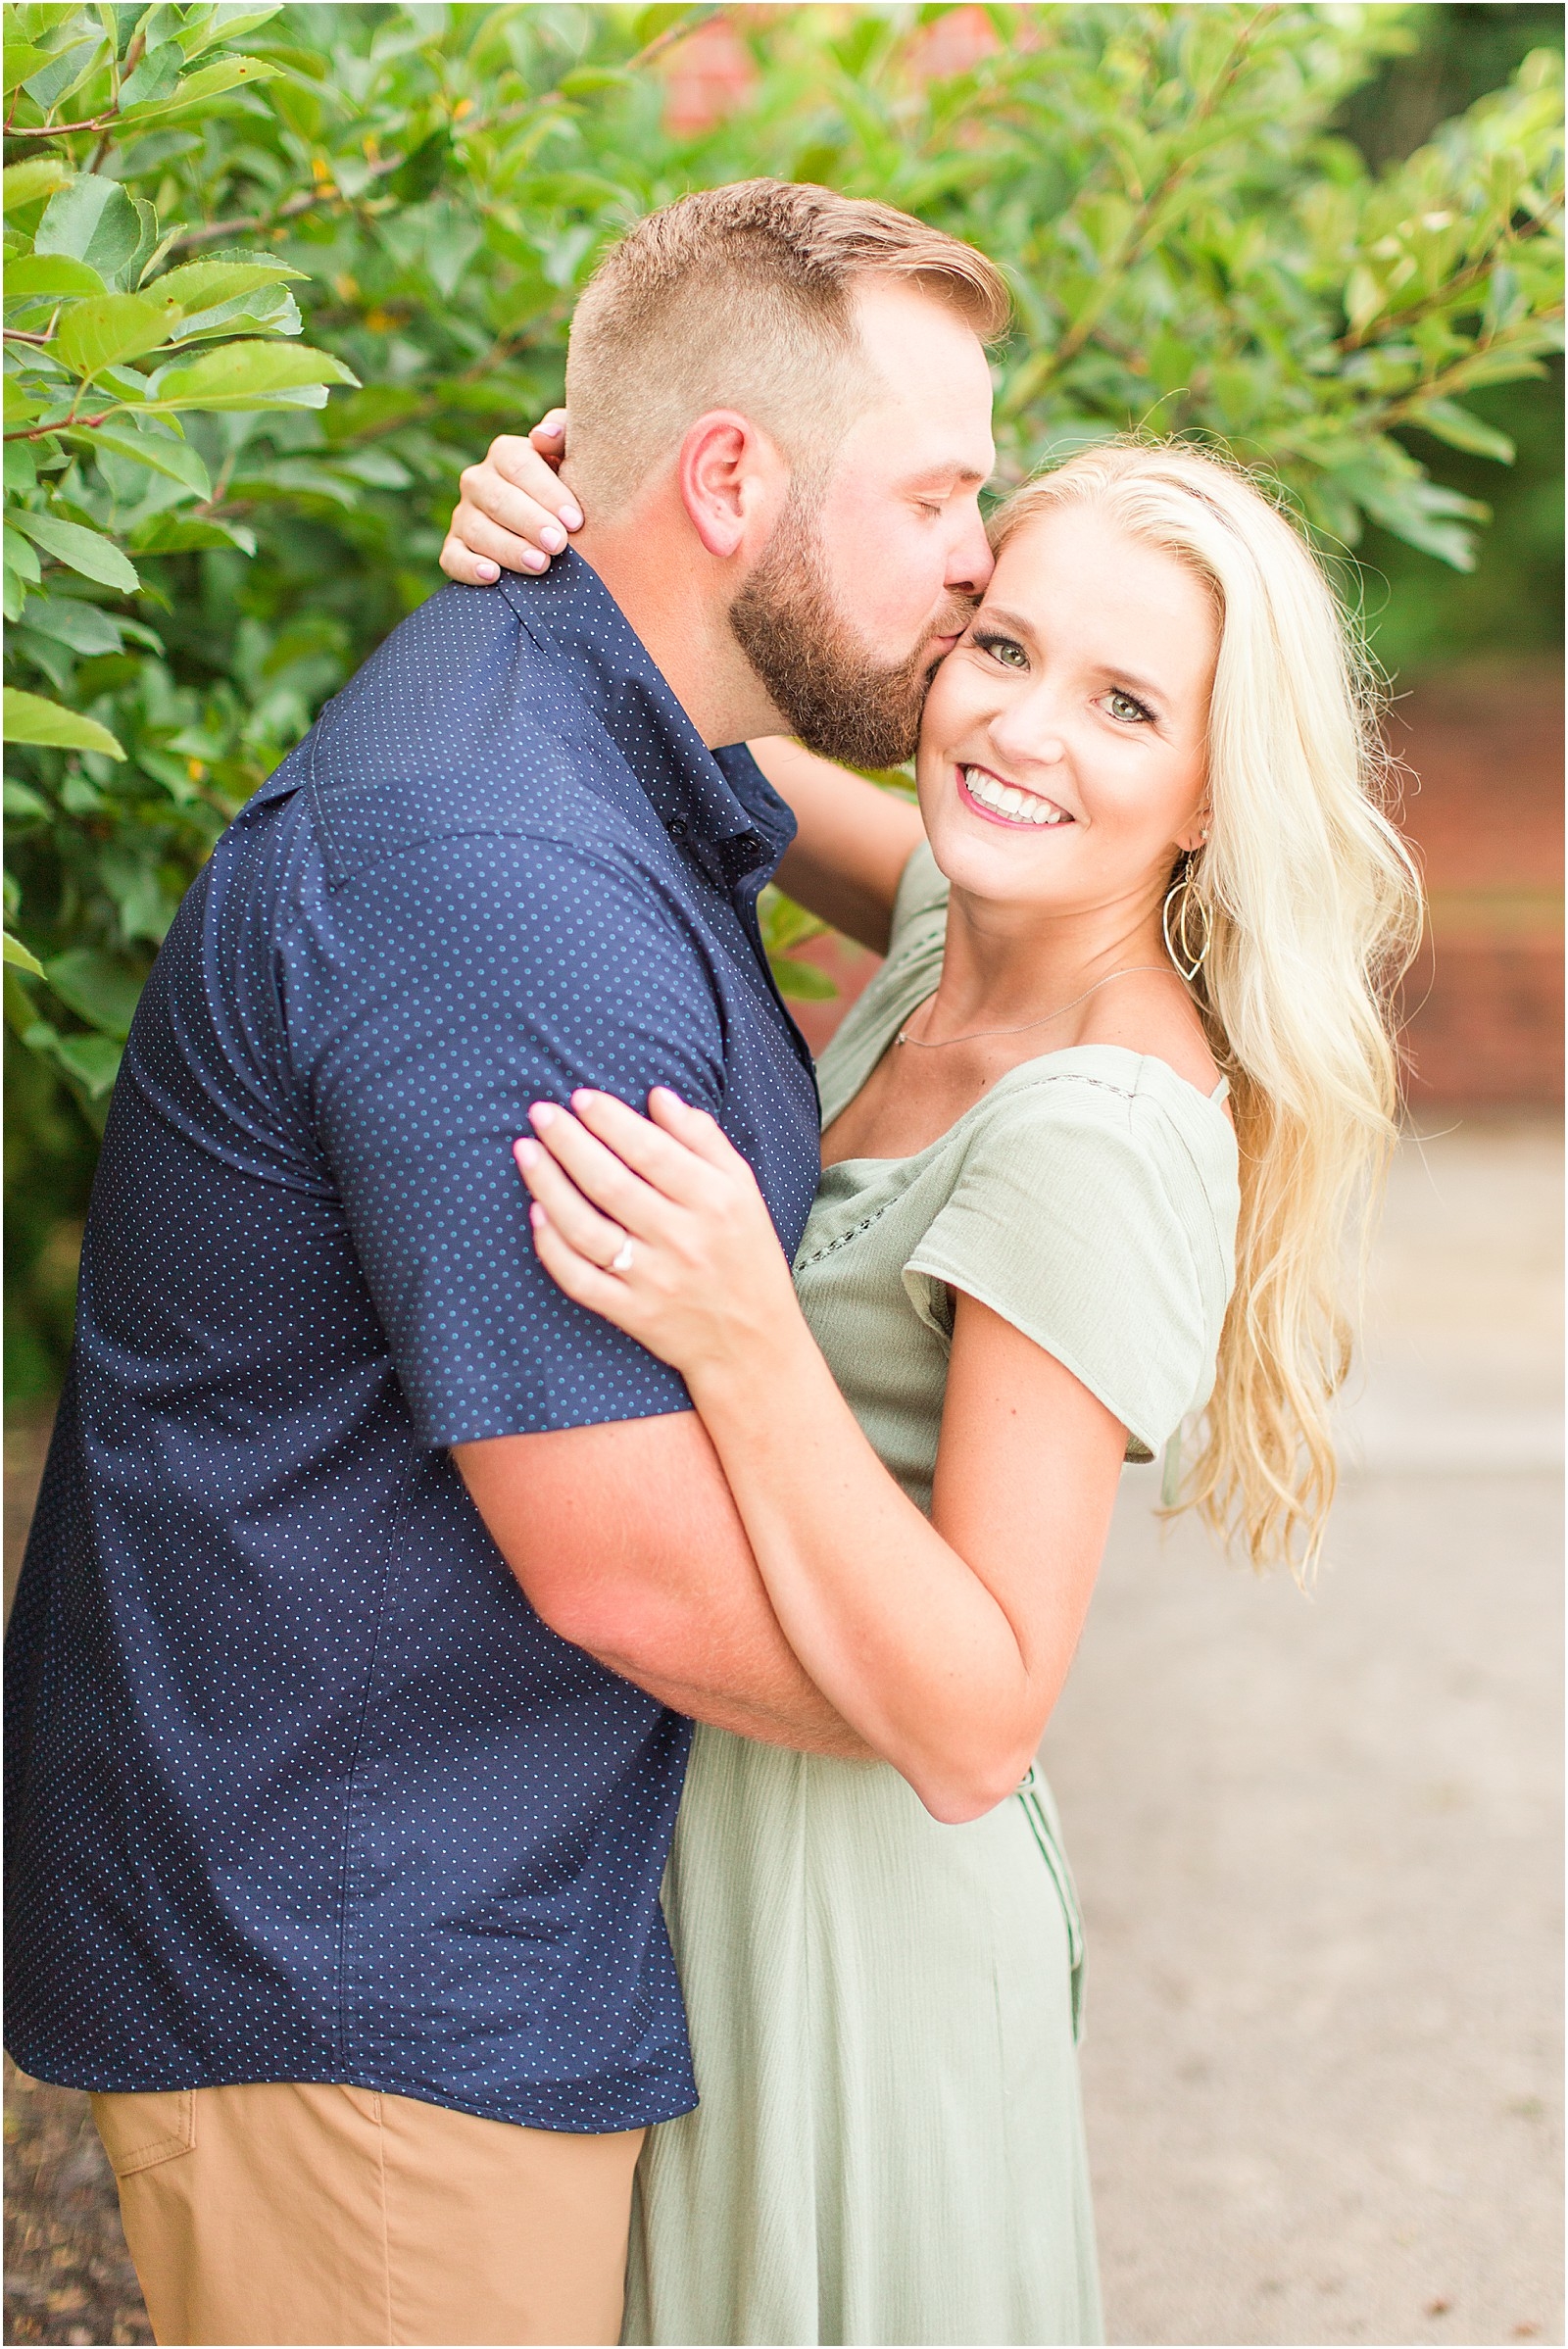 A Sweet and Sunny Engagement Session | Bret and Brandie | Evansville ...